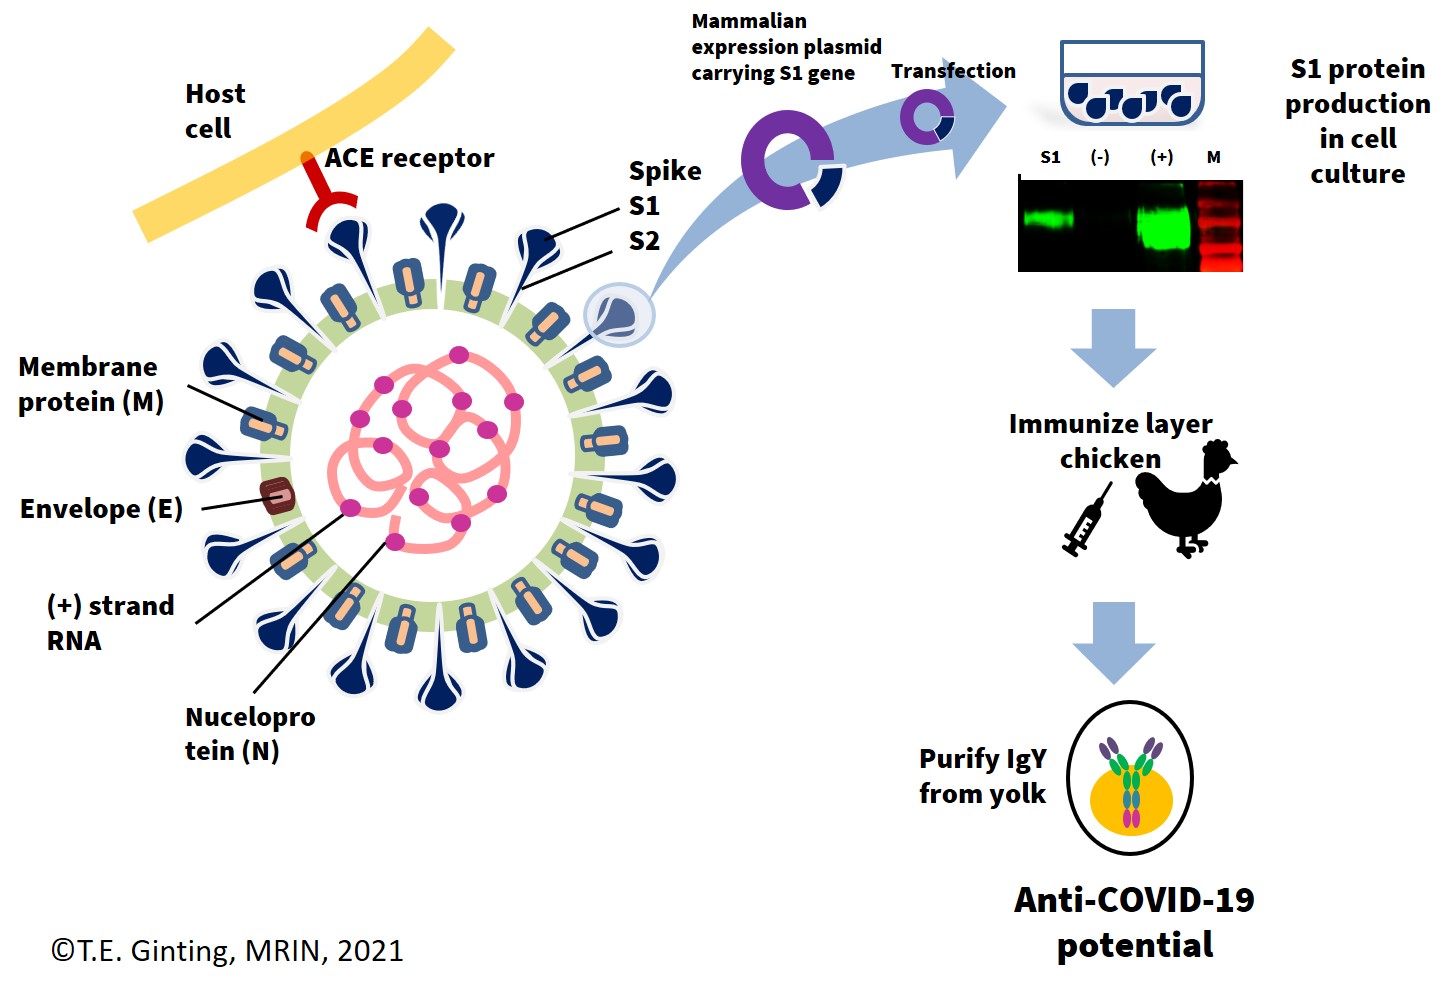 MRIN-UPH Participates in the Discovery of Antiserum IgY as an alternative therapy for Covid-19.